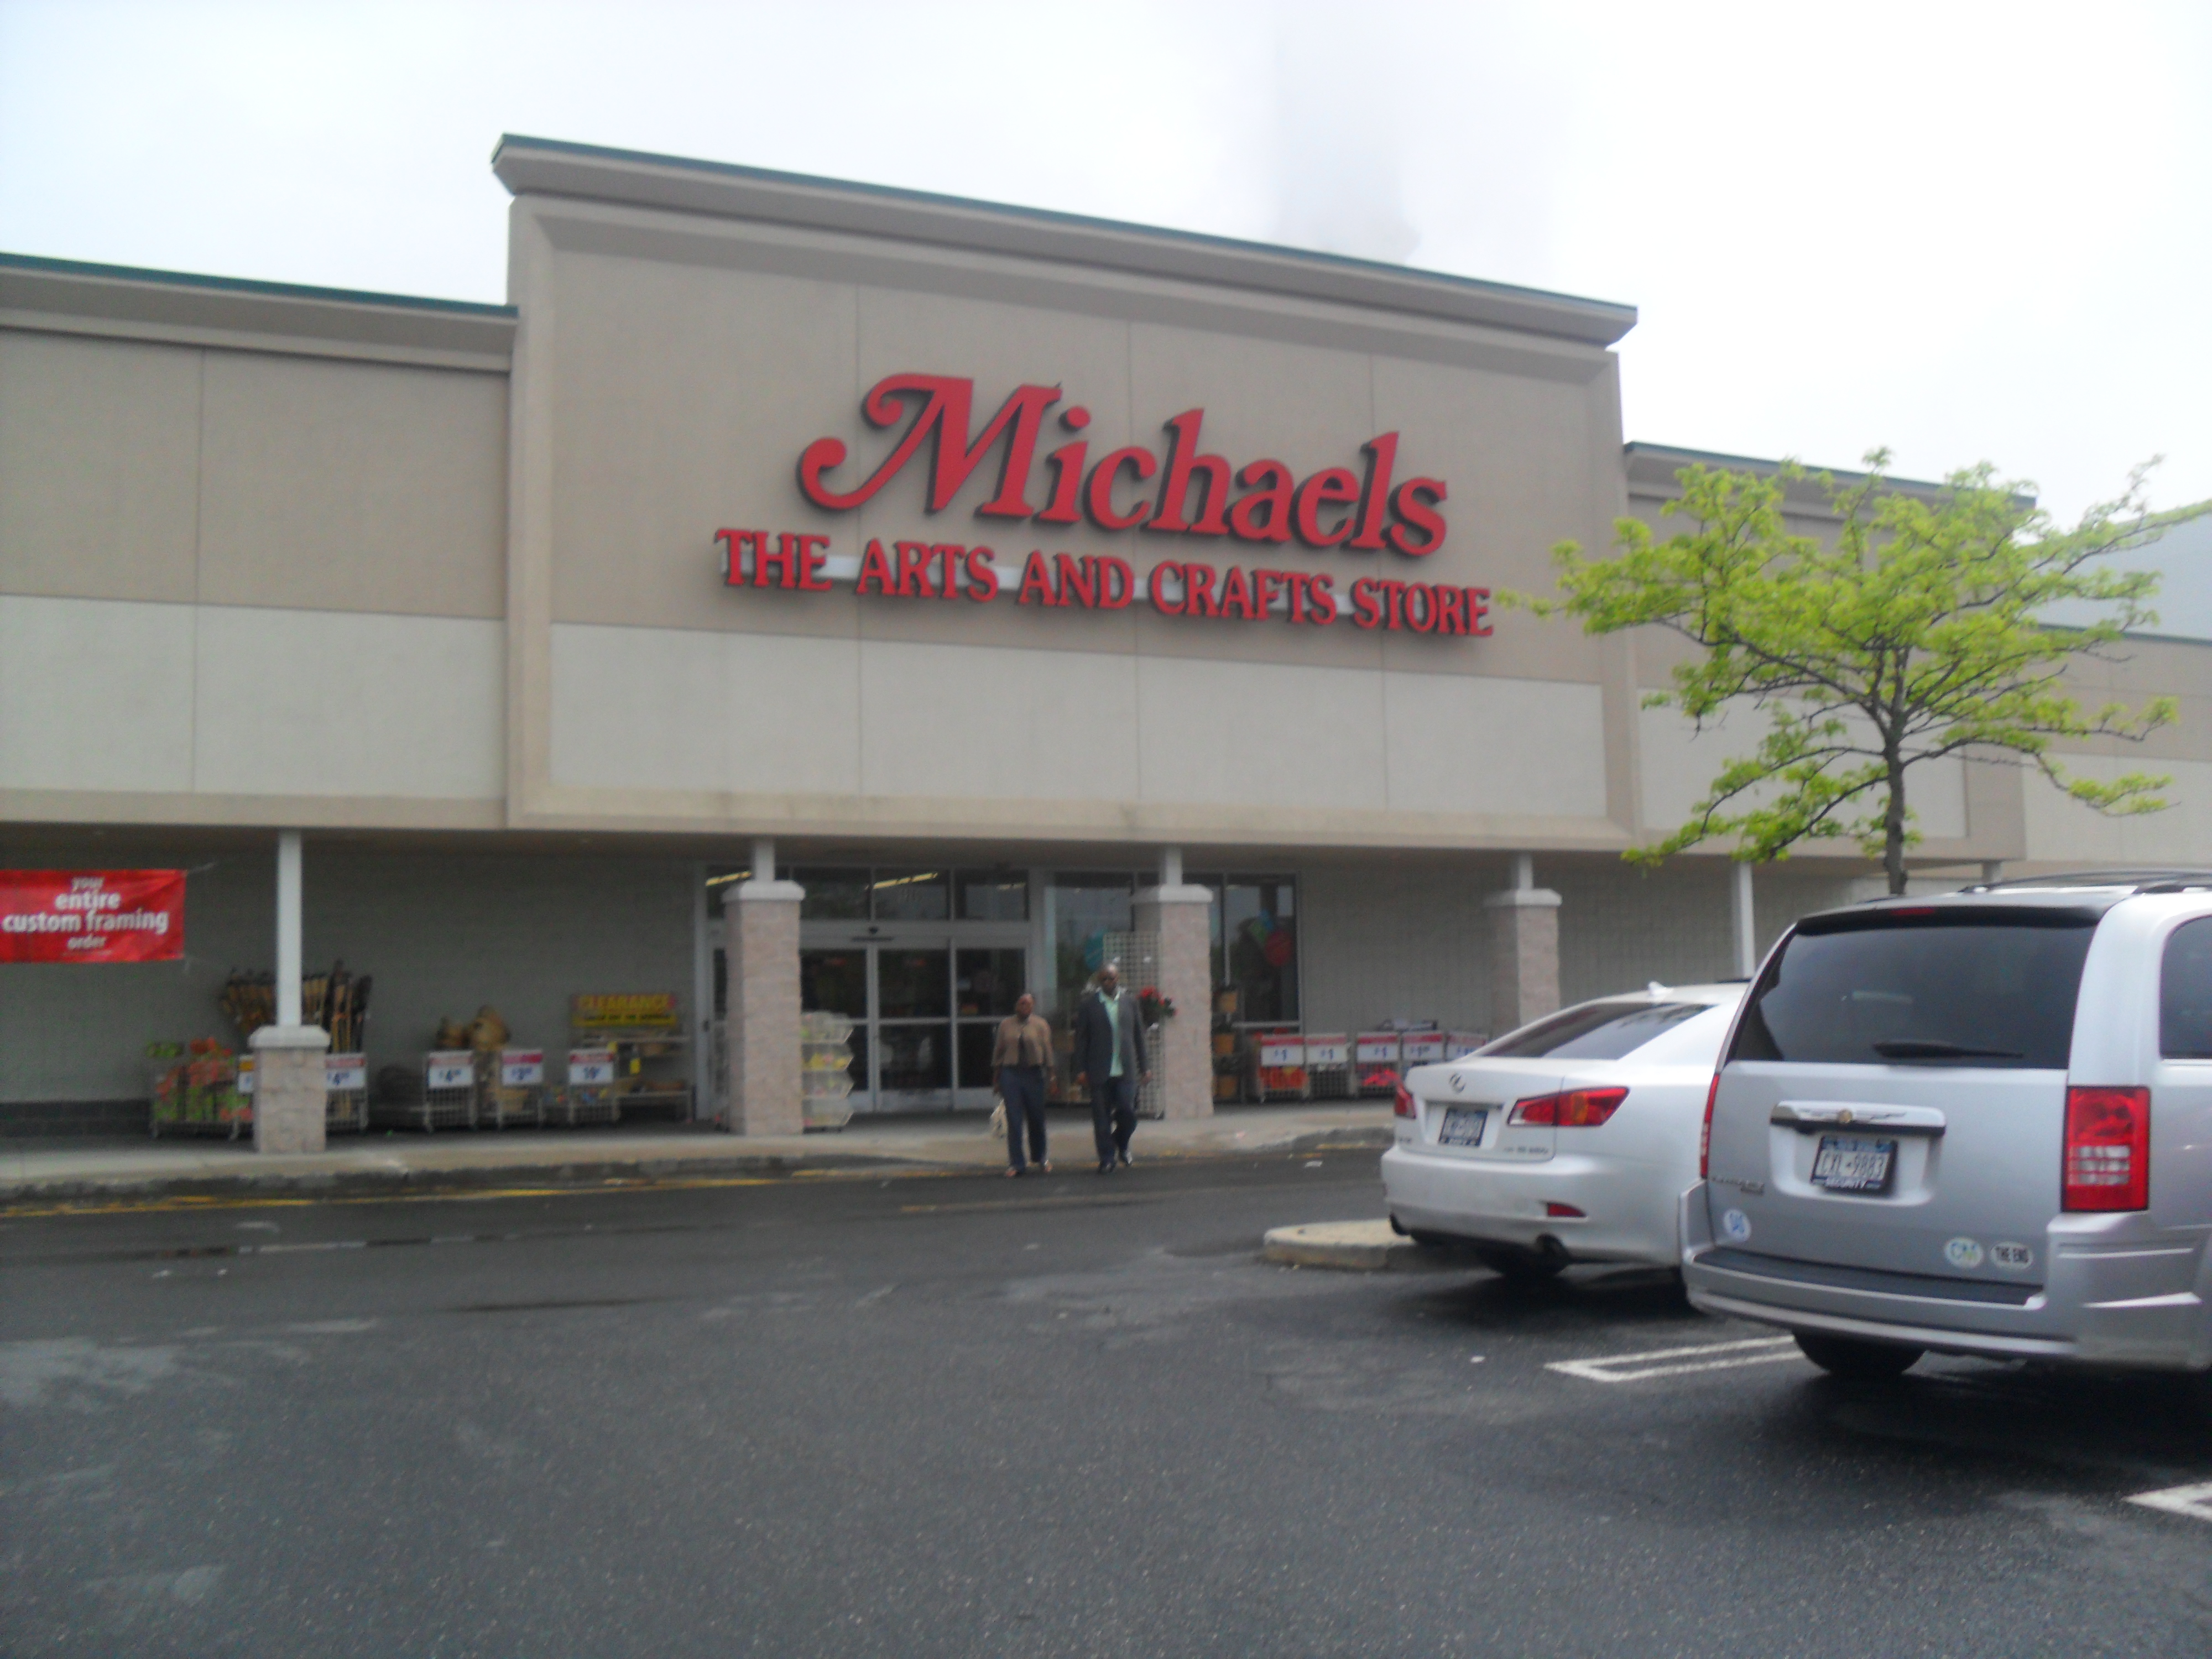 Michaels Arts and Craft Store in Westbury, NY